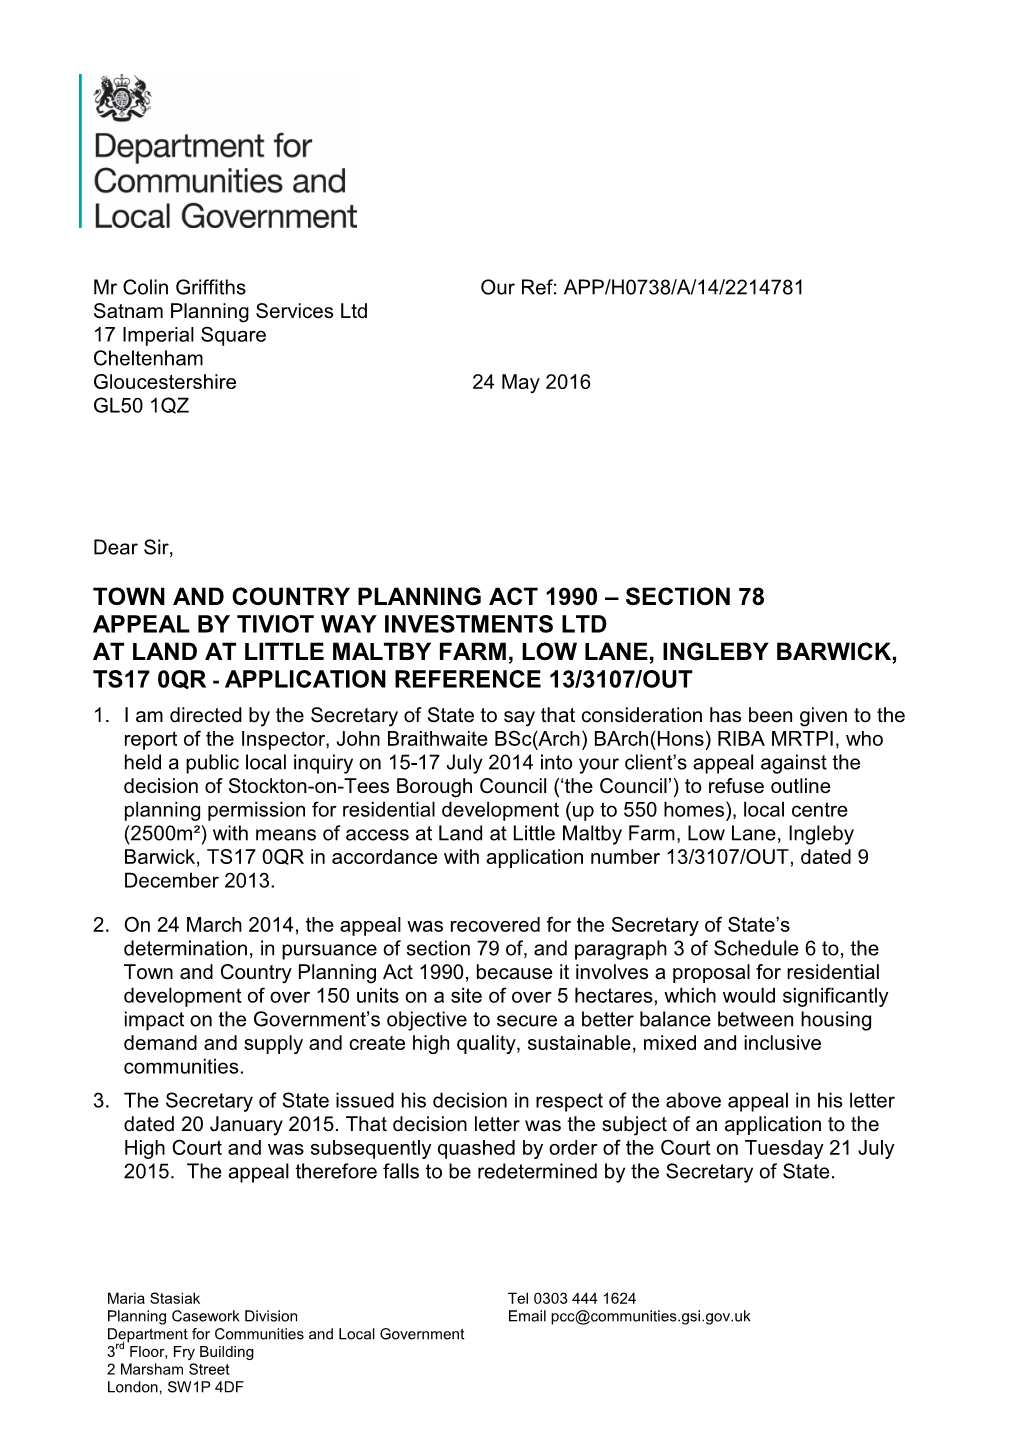 Town and Country Planning Act 1990 – Section 78